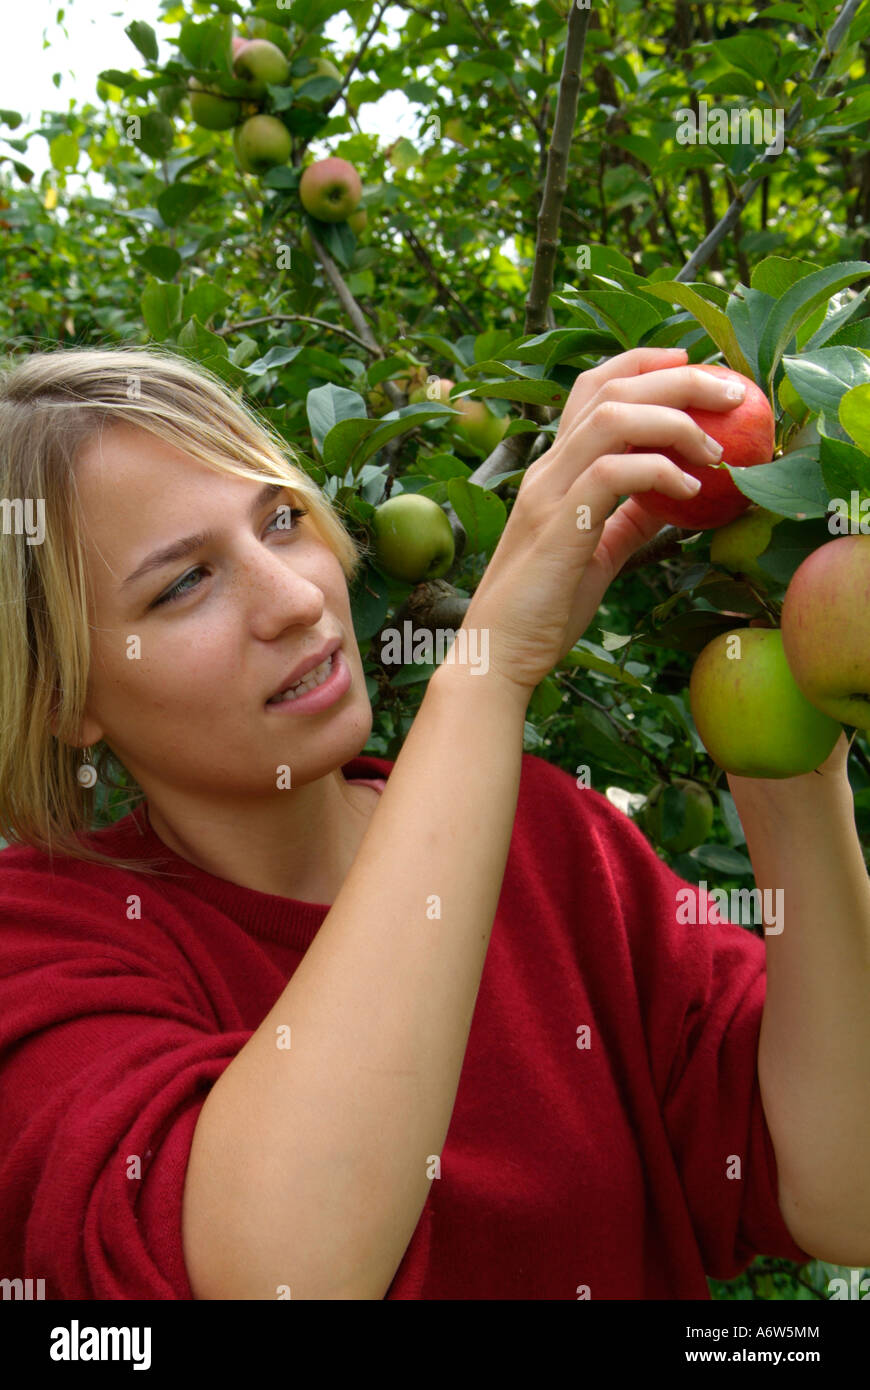 Young woman picking apples, Goldpamaene malus domesticus Stock Photo